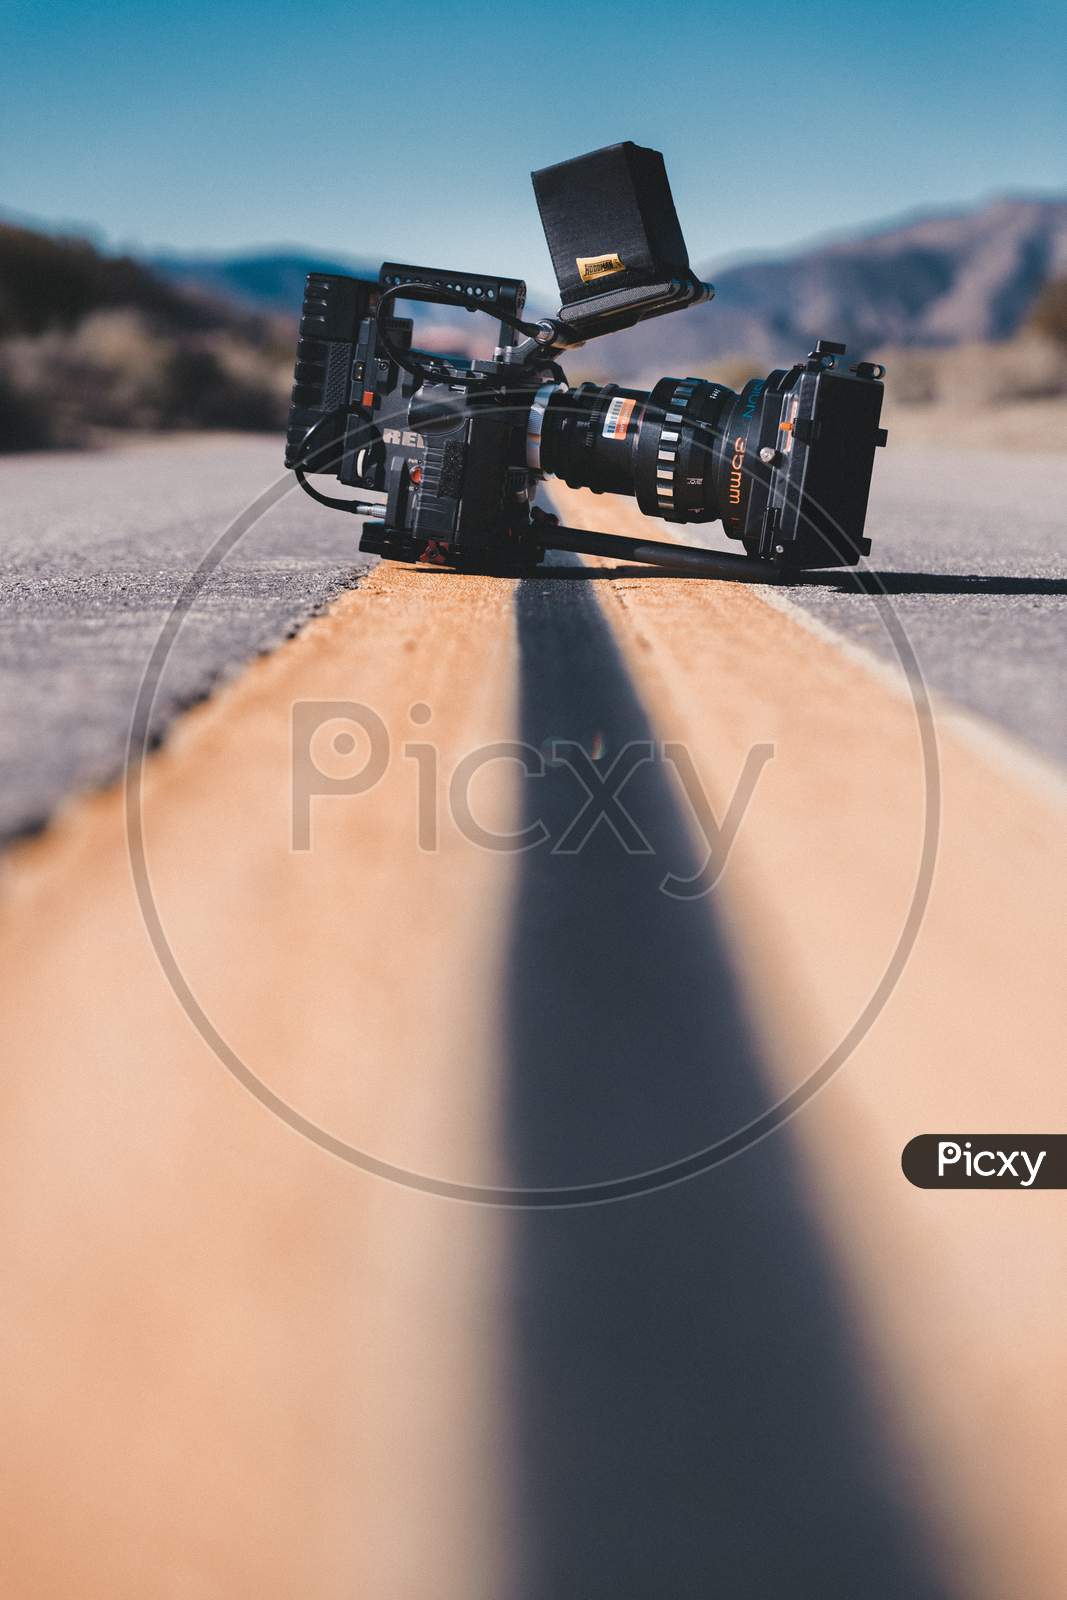 Camera Image on the road surface